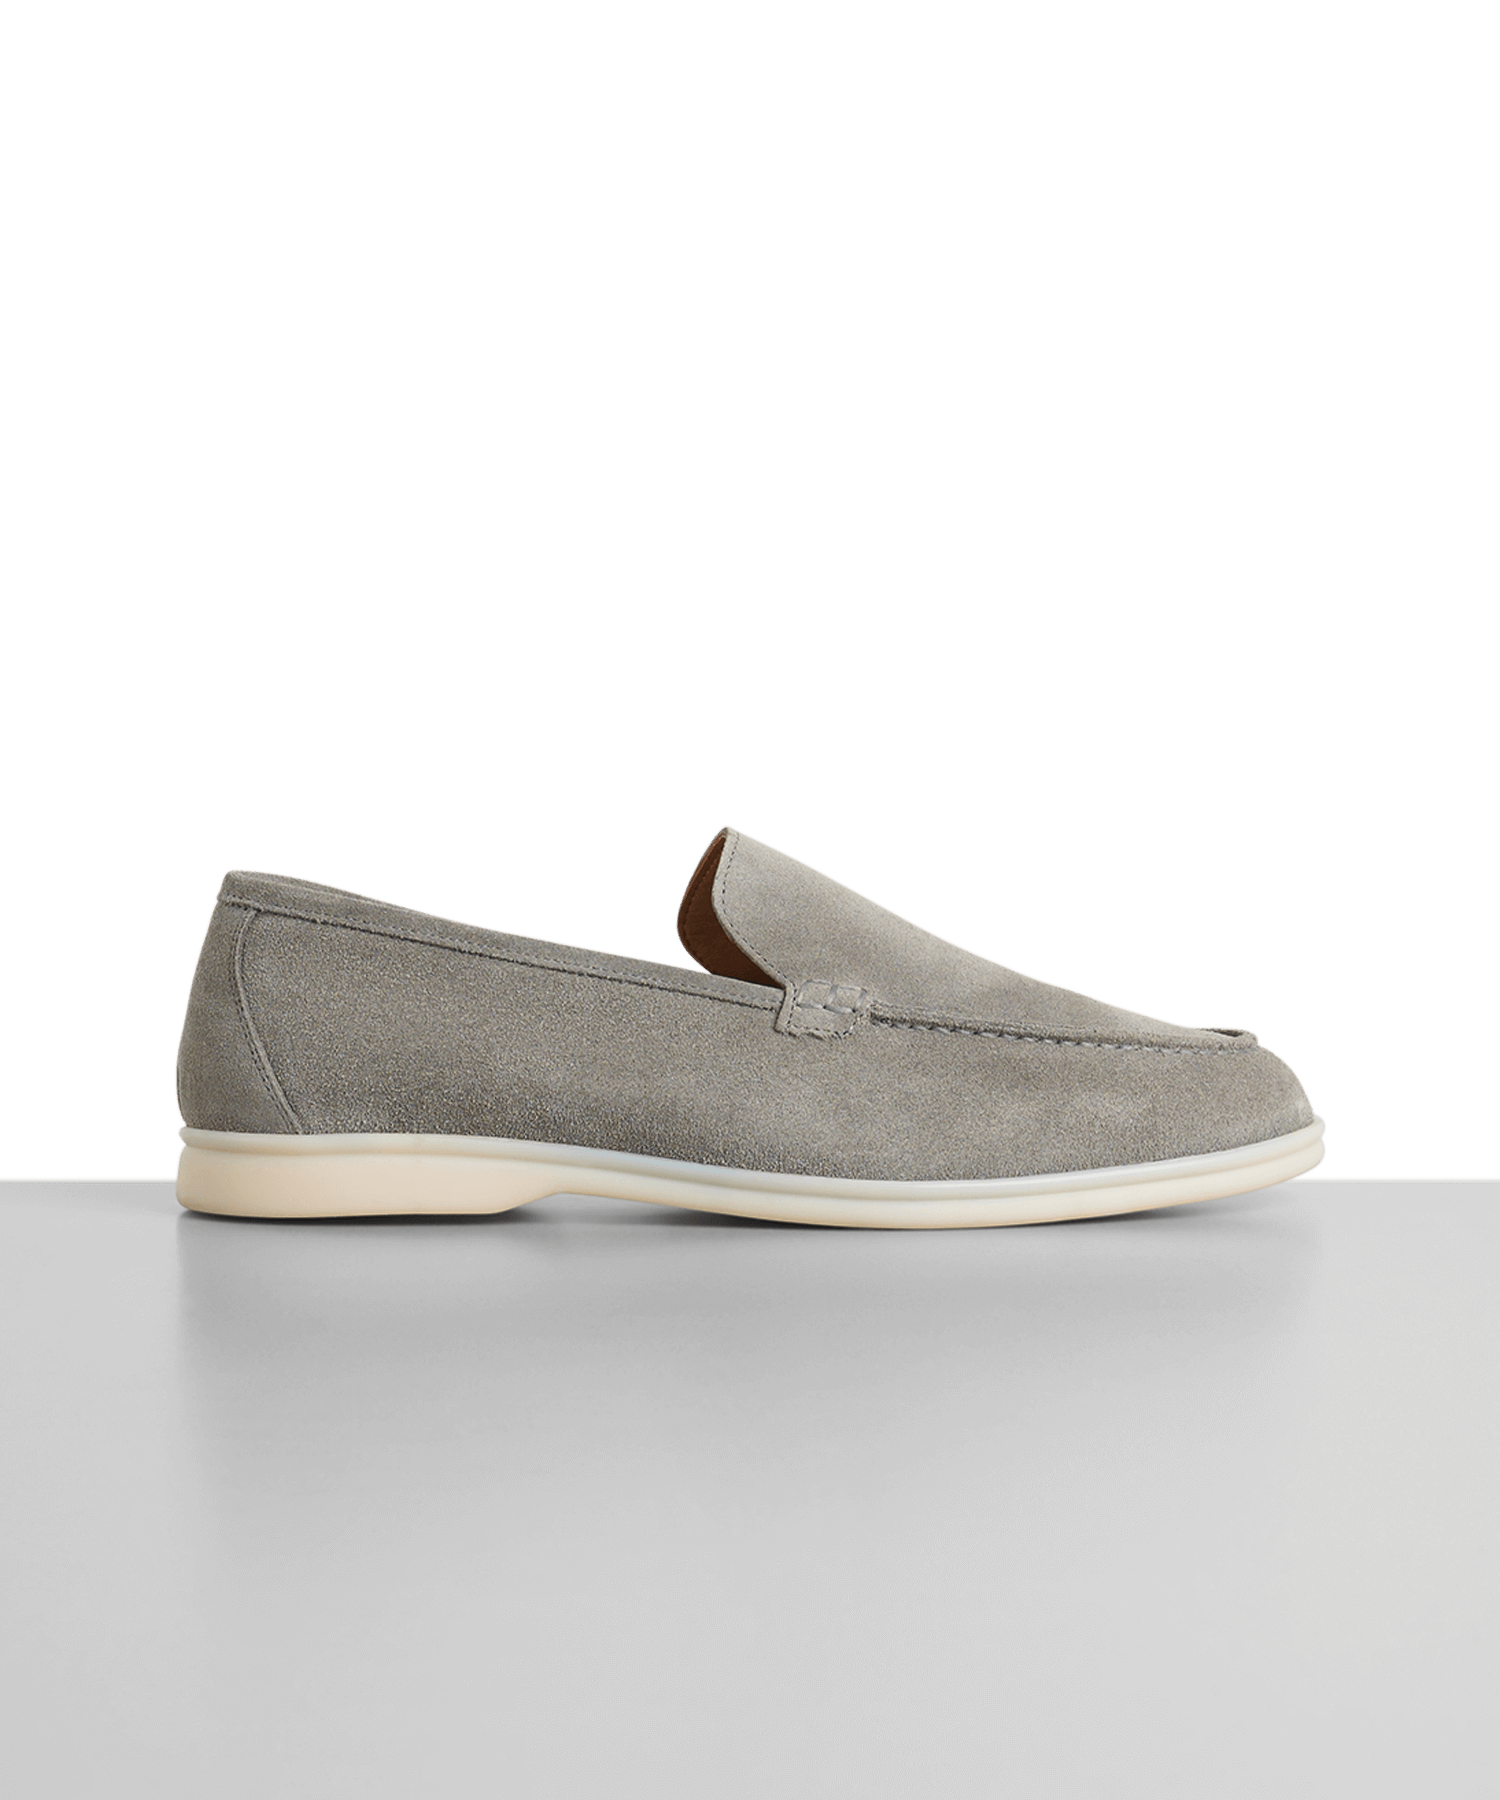 SOCI3TY Summer loafer suede grijs - The Society Shop